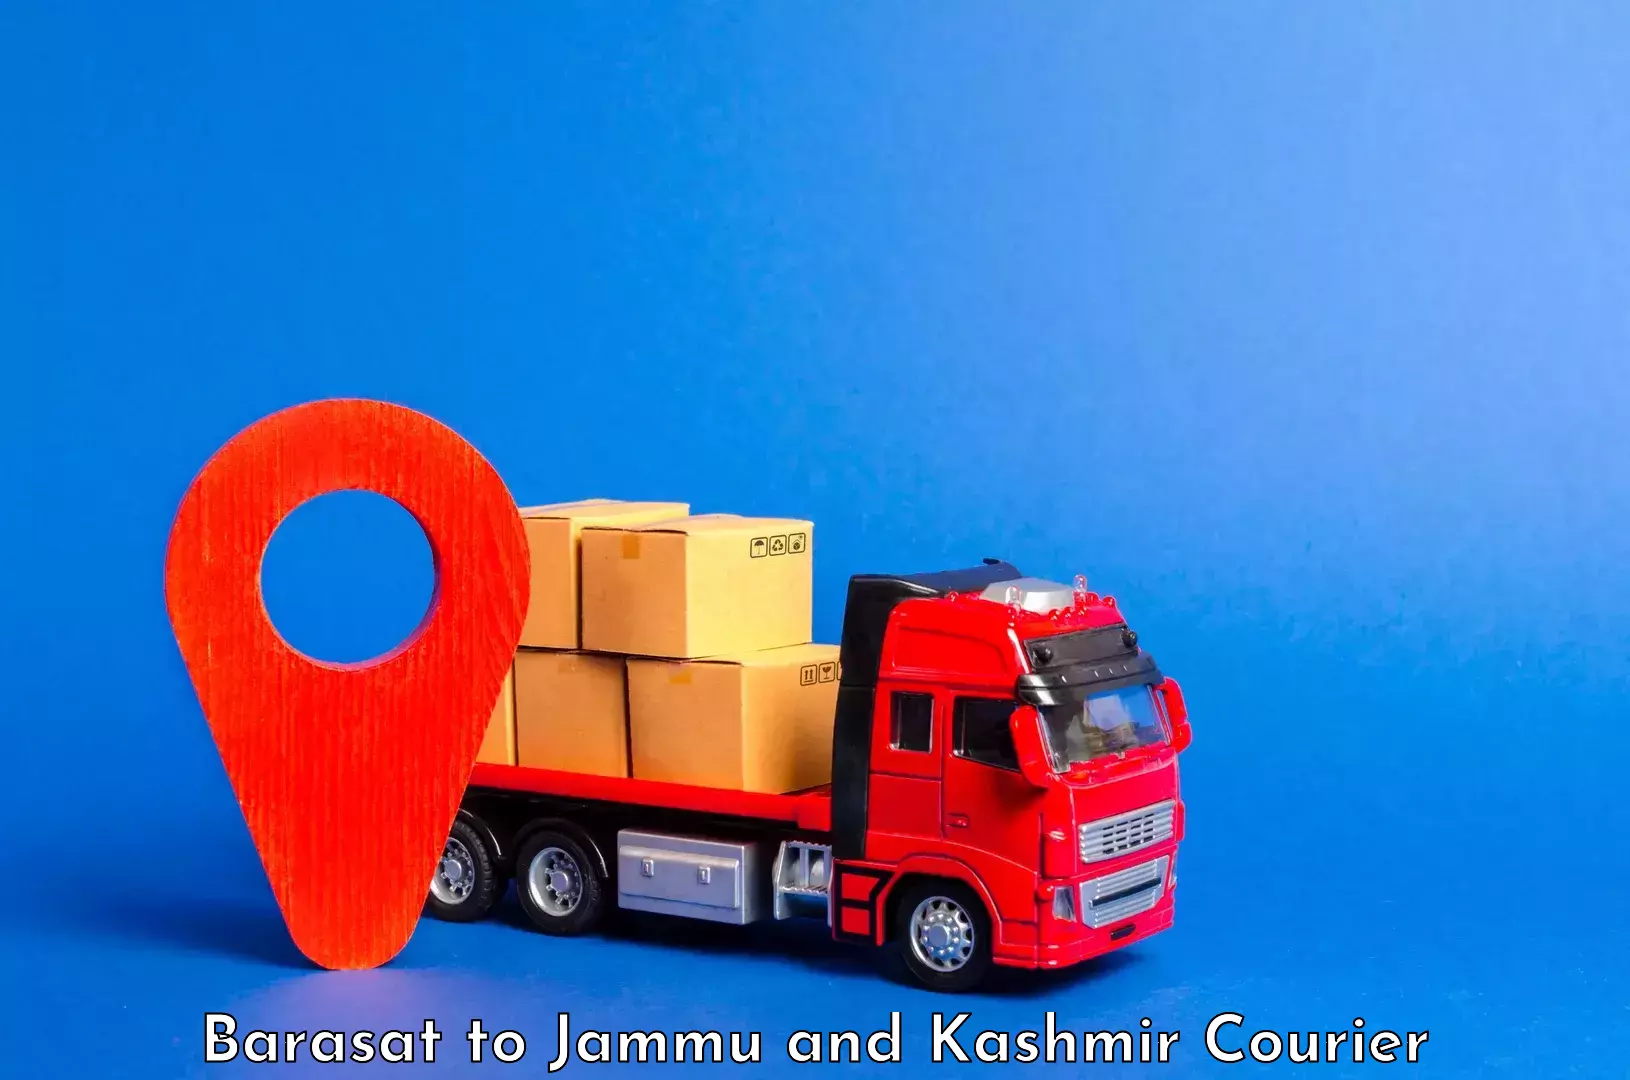 Luggage transport consulting Barasat to Jammu and Kashmir